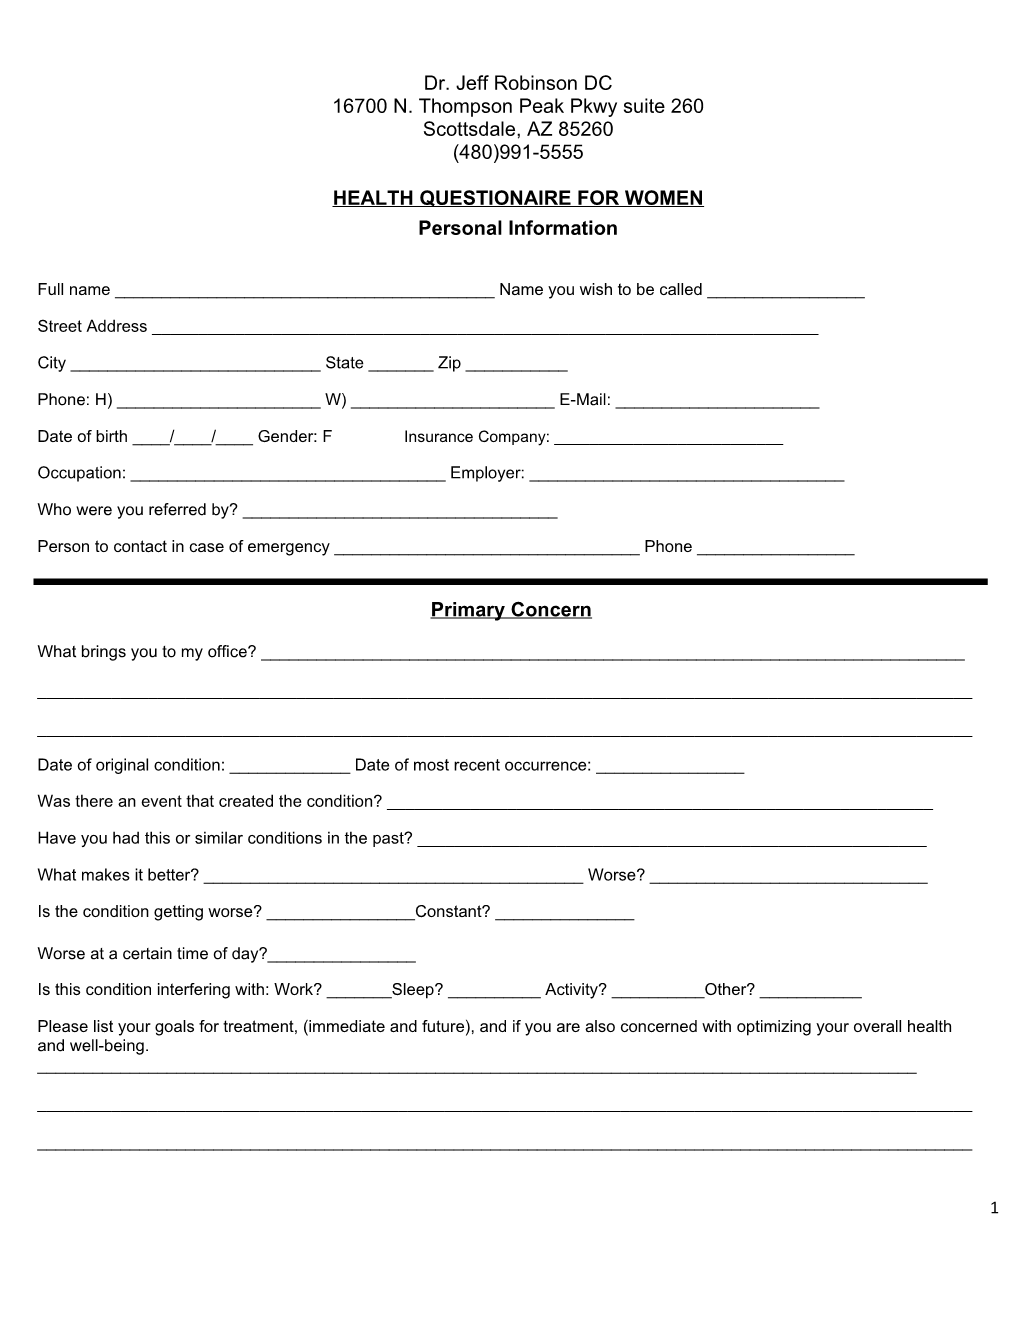 Health Questionaire for Women